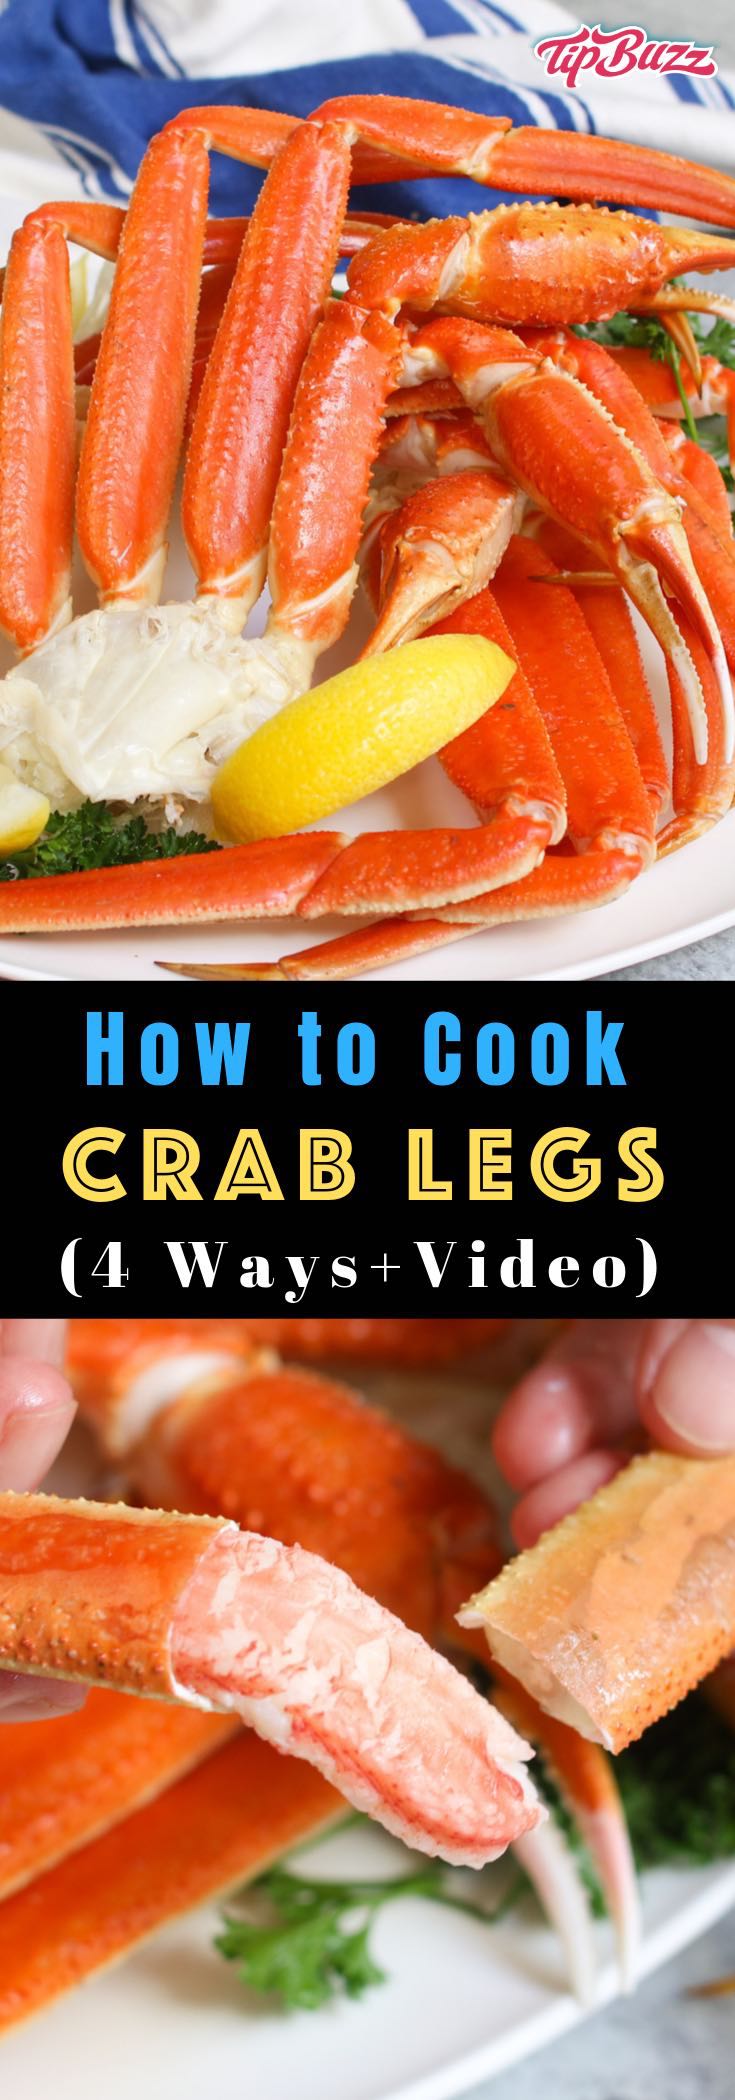 Learn how to cook crab legs for a delicious meal bursting with seafood flavors! Whether you’re using frozen king crab or snow crab legs, follow this essential step-by-step guide on how to easily cook them in just 15 minutes by steaming, boiling, baking or grilling.